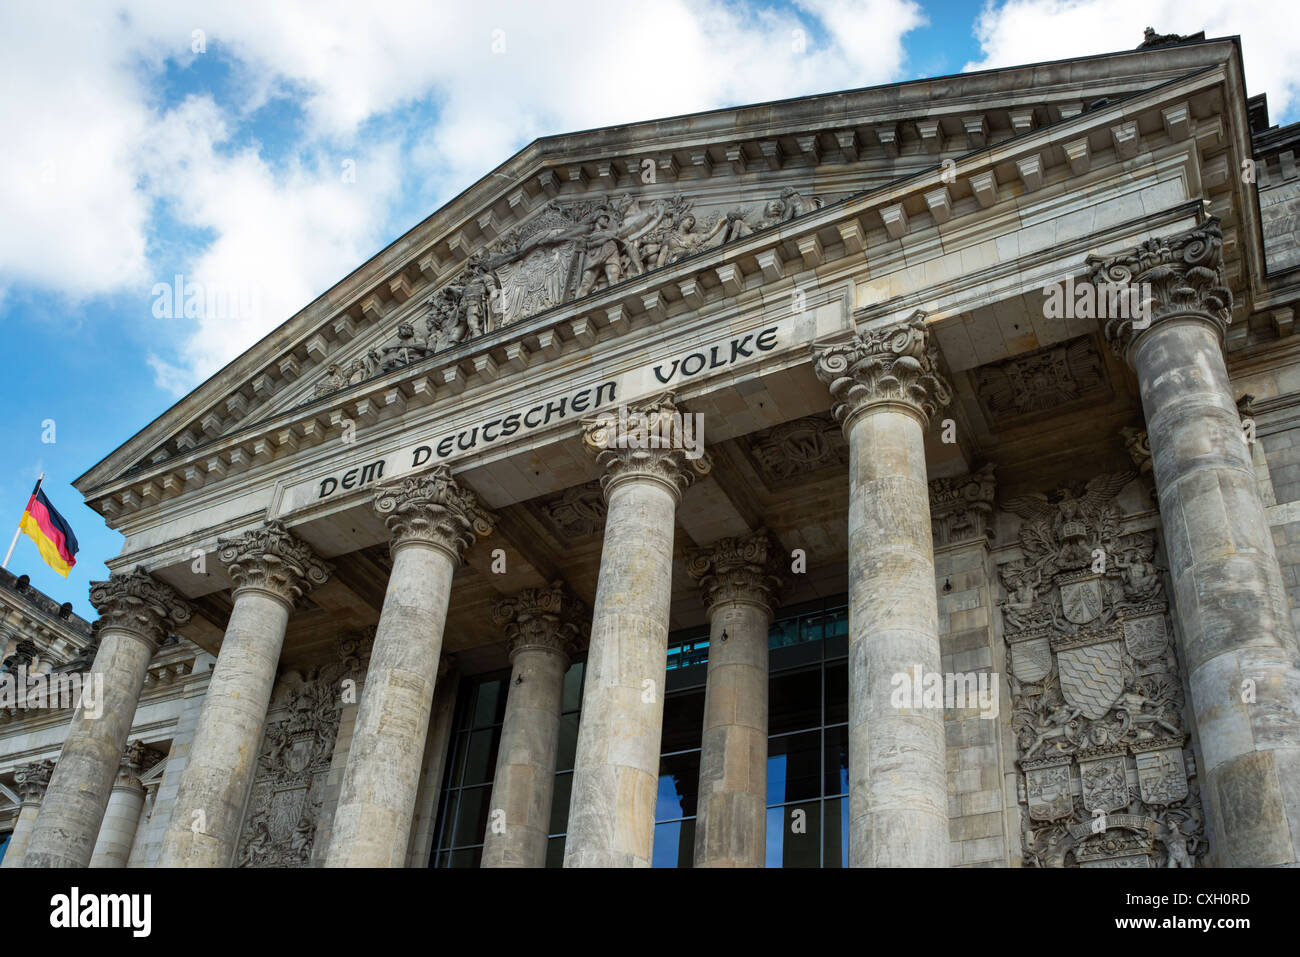 Detail of the Reichstag building, home of the german parliament, Berlin, Germany, Europe Stock Photo